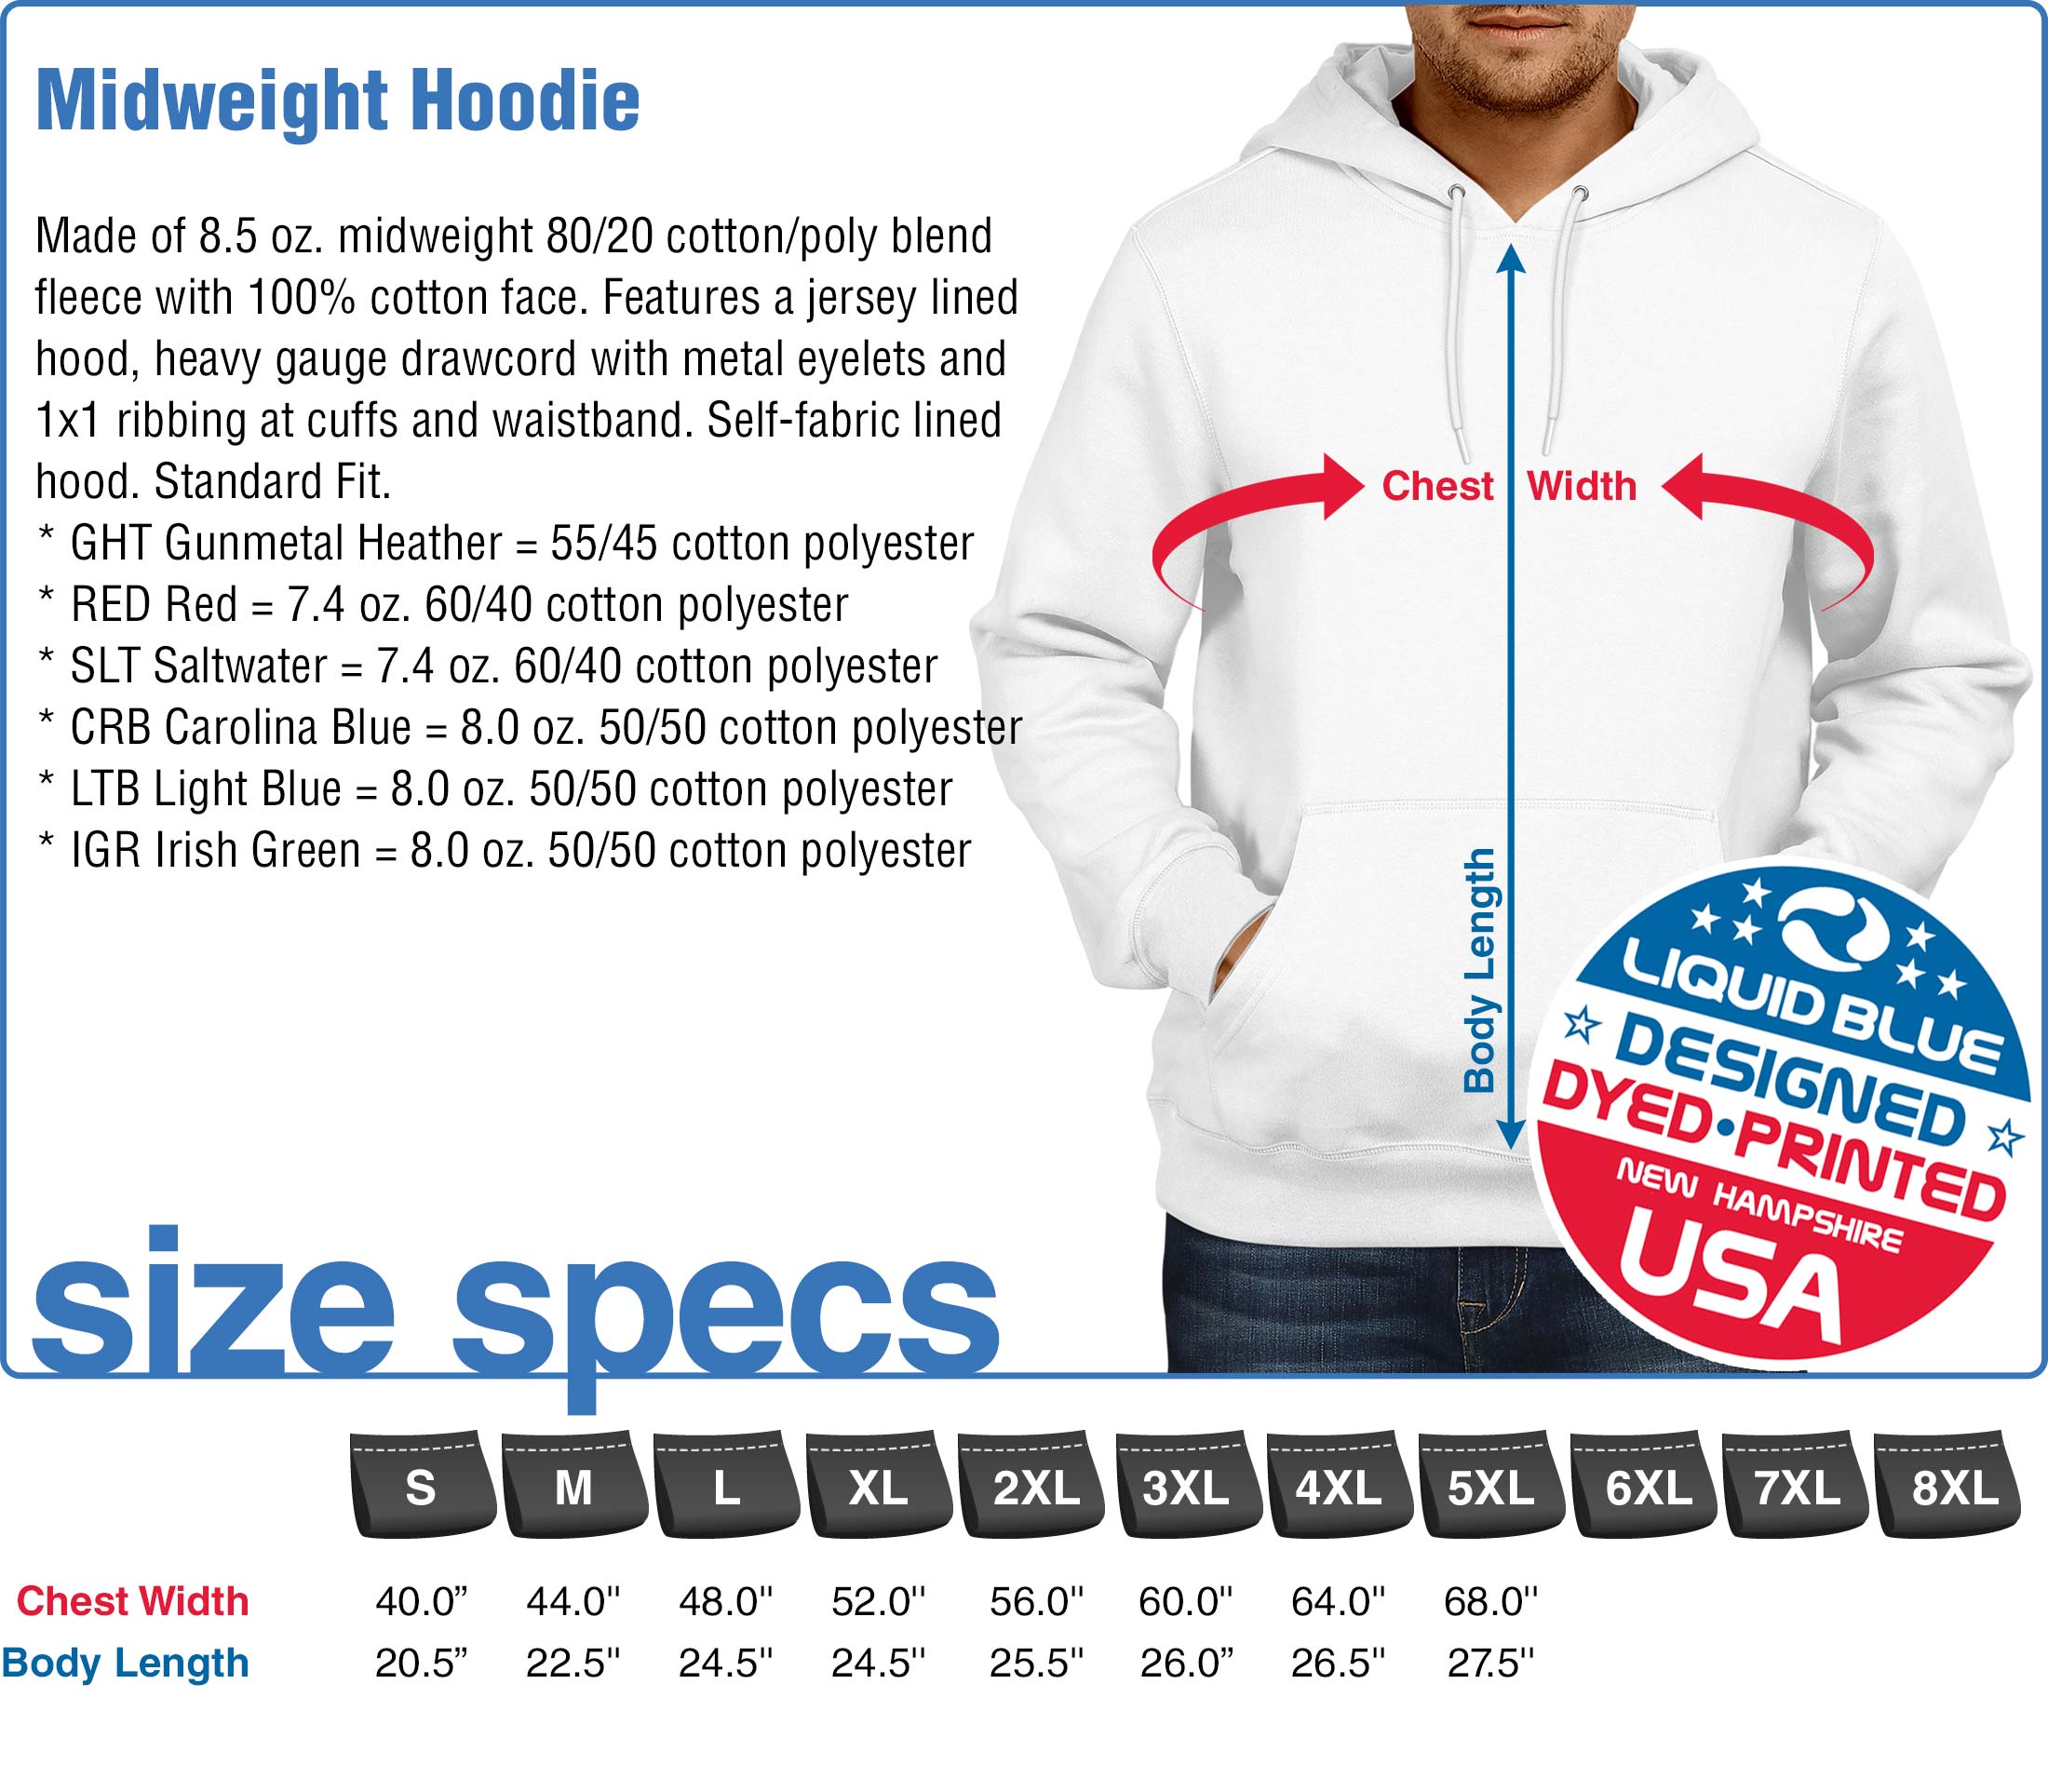 Midweight Hoodie Size Specifications